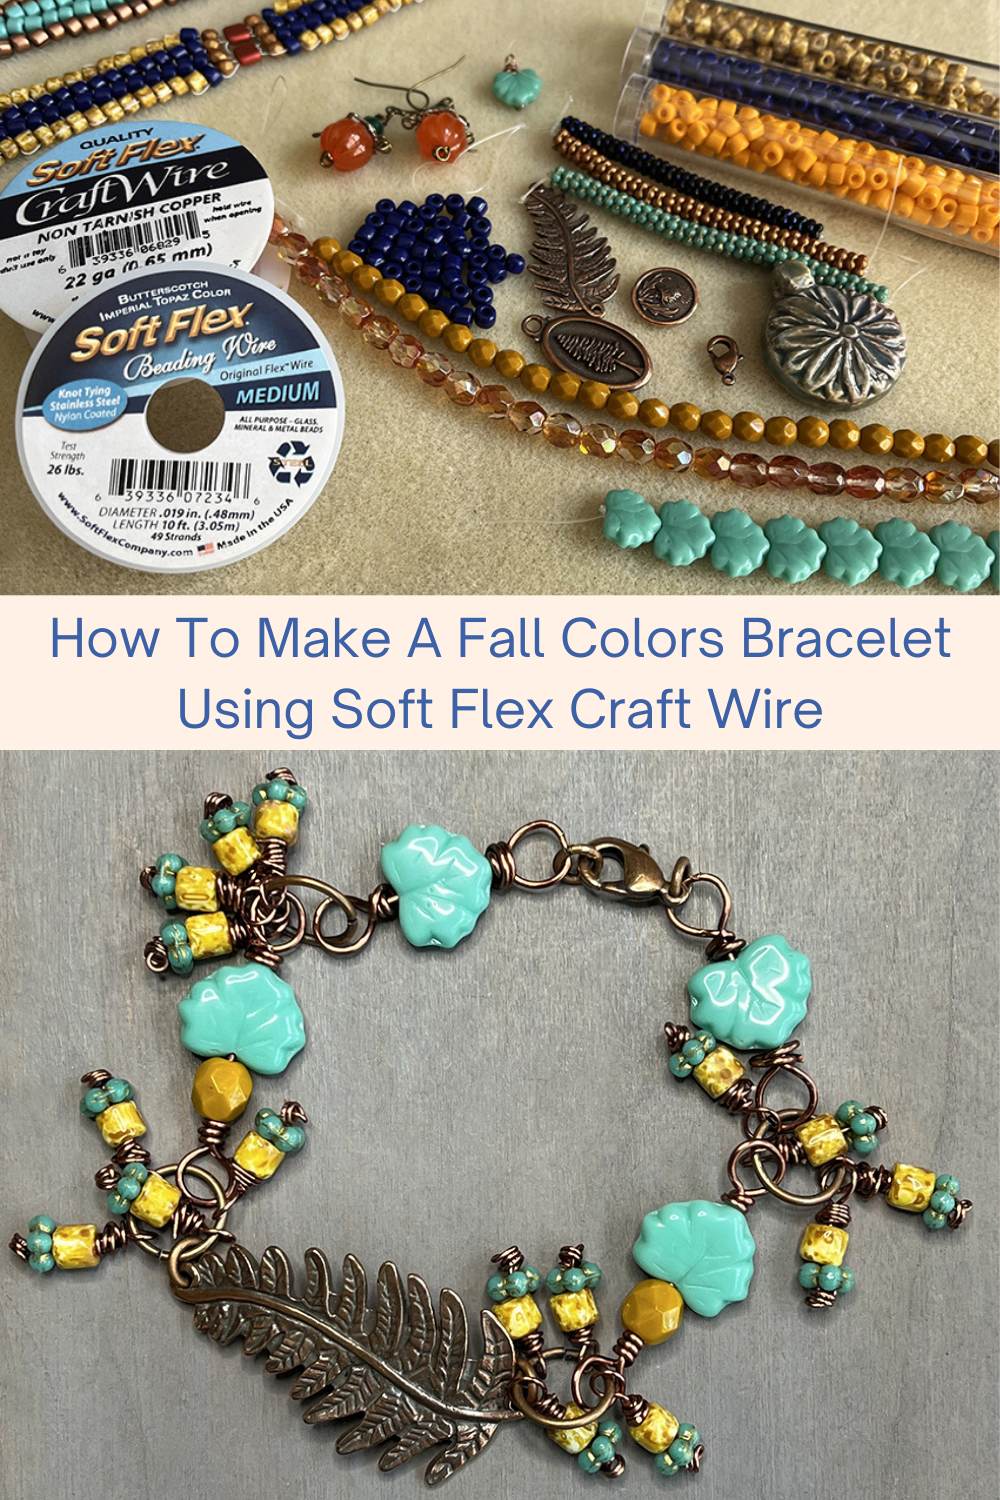 How To Make A Fall Colors Bracelet Using Soft Flex Craft Wire Collage